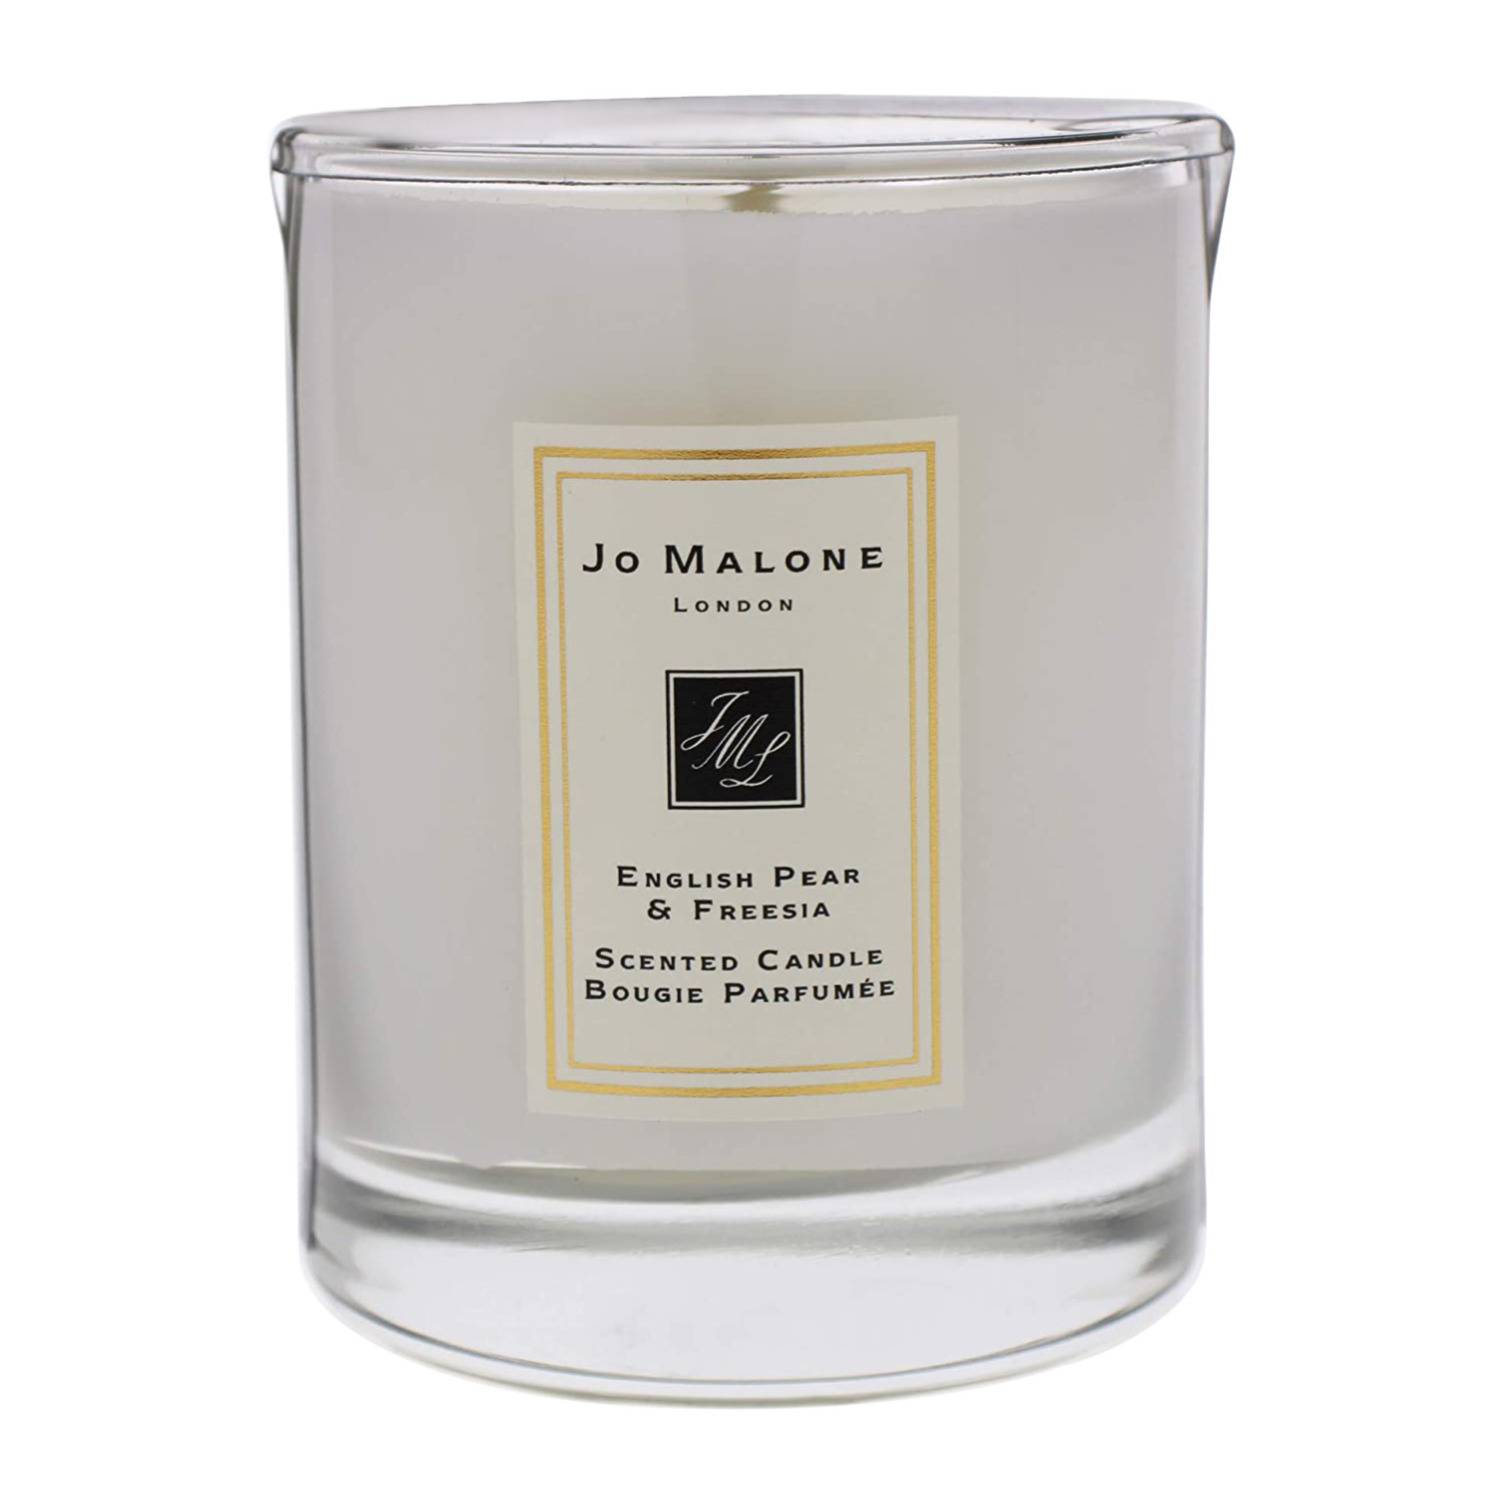 Jo Malone English Pear and Freesia Scented Travel Candle (2oz)